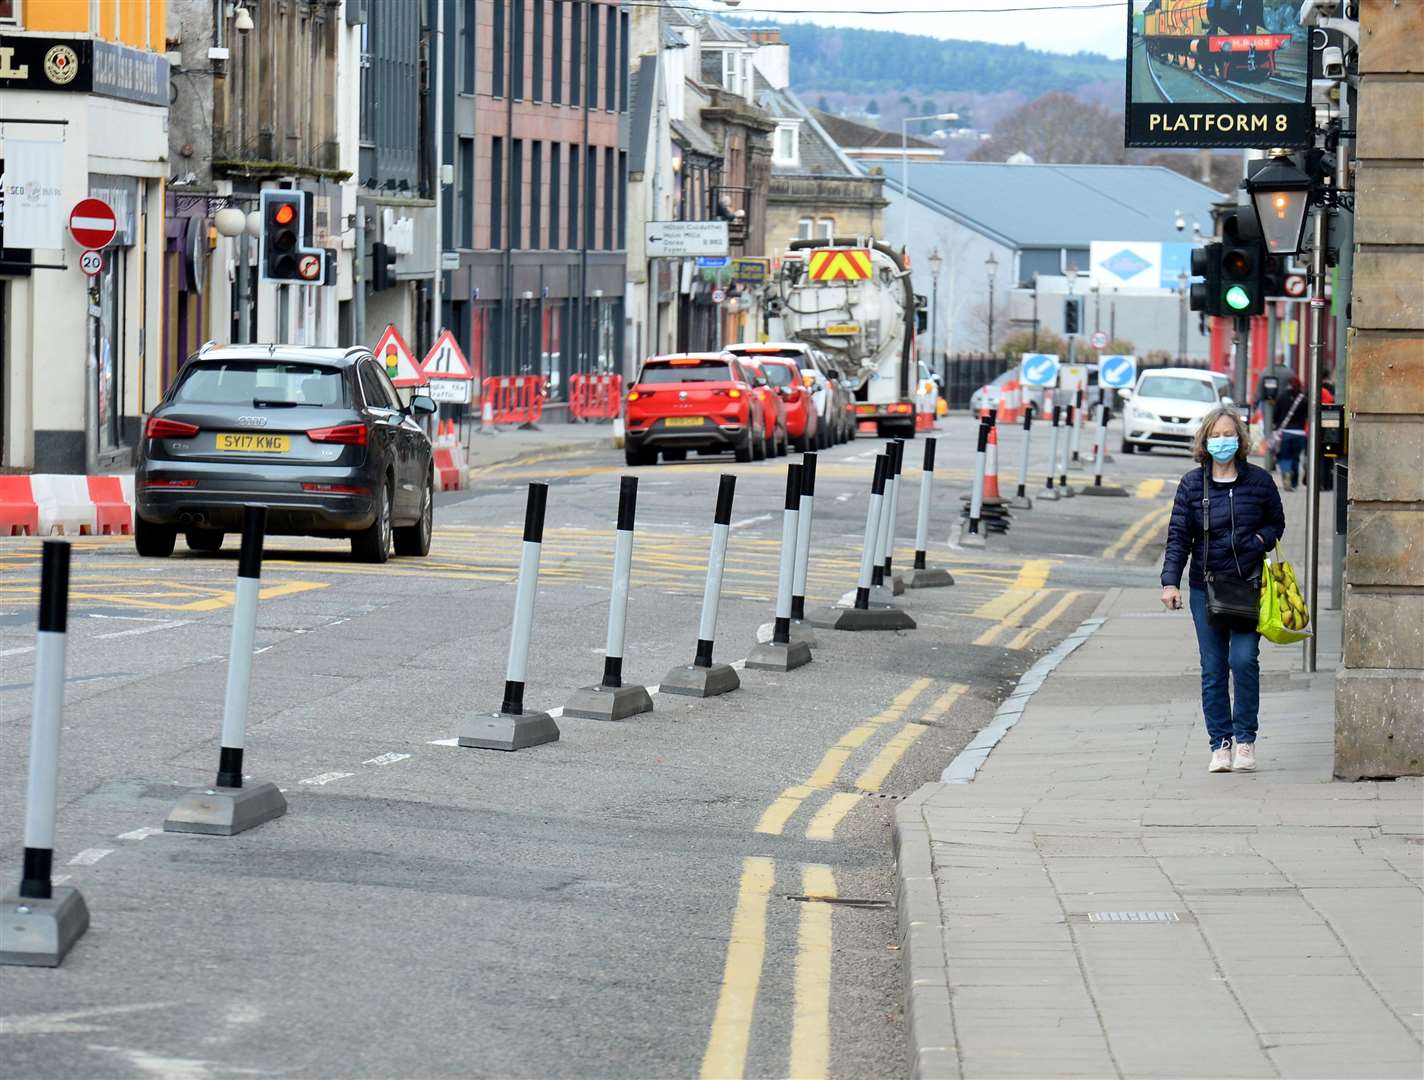 The original Spaces for People resulted in barriers added to the city centre for social distancing and active travel including this one on Academy Street.